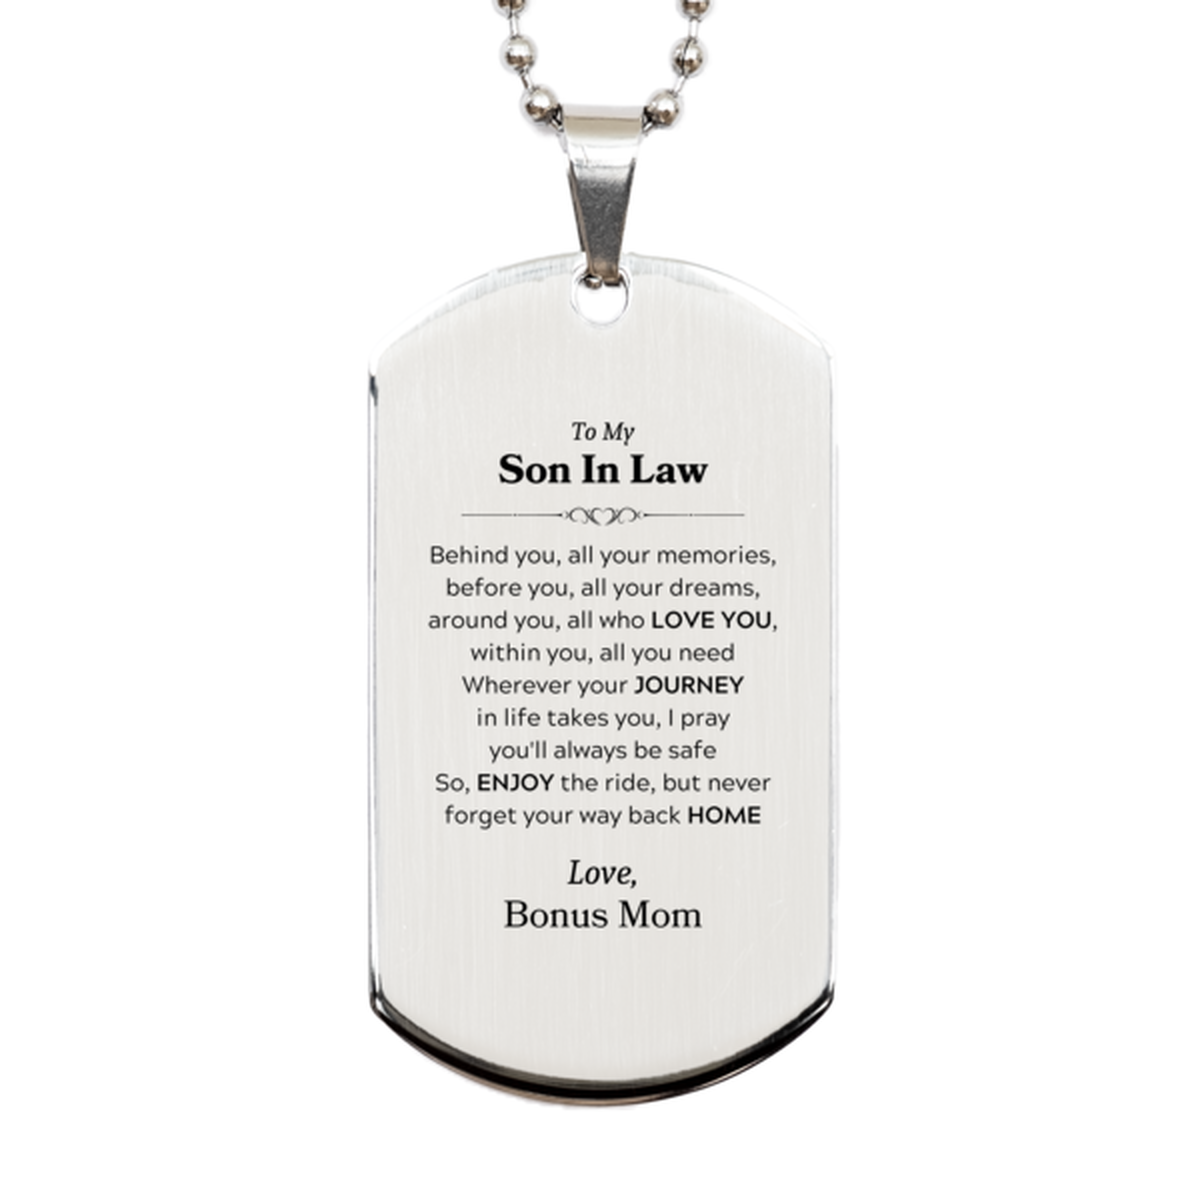 To My Son In Law Graduation Gifts from Bonus Mom, Son In Law Silver Dog Tag Christmas Birthday Gifts for Son In Law Behind you, all your memories, before you, all your dreams. Love, Bonus Mom